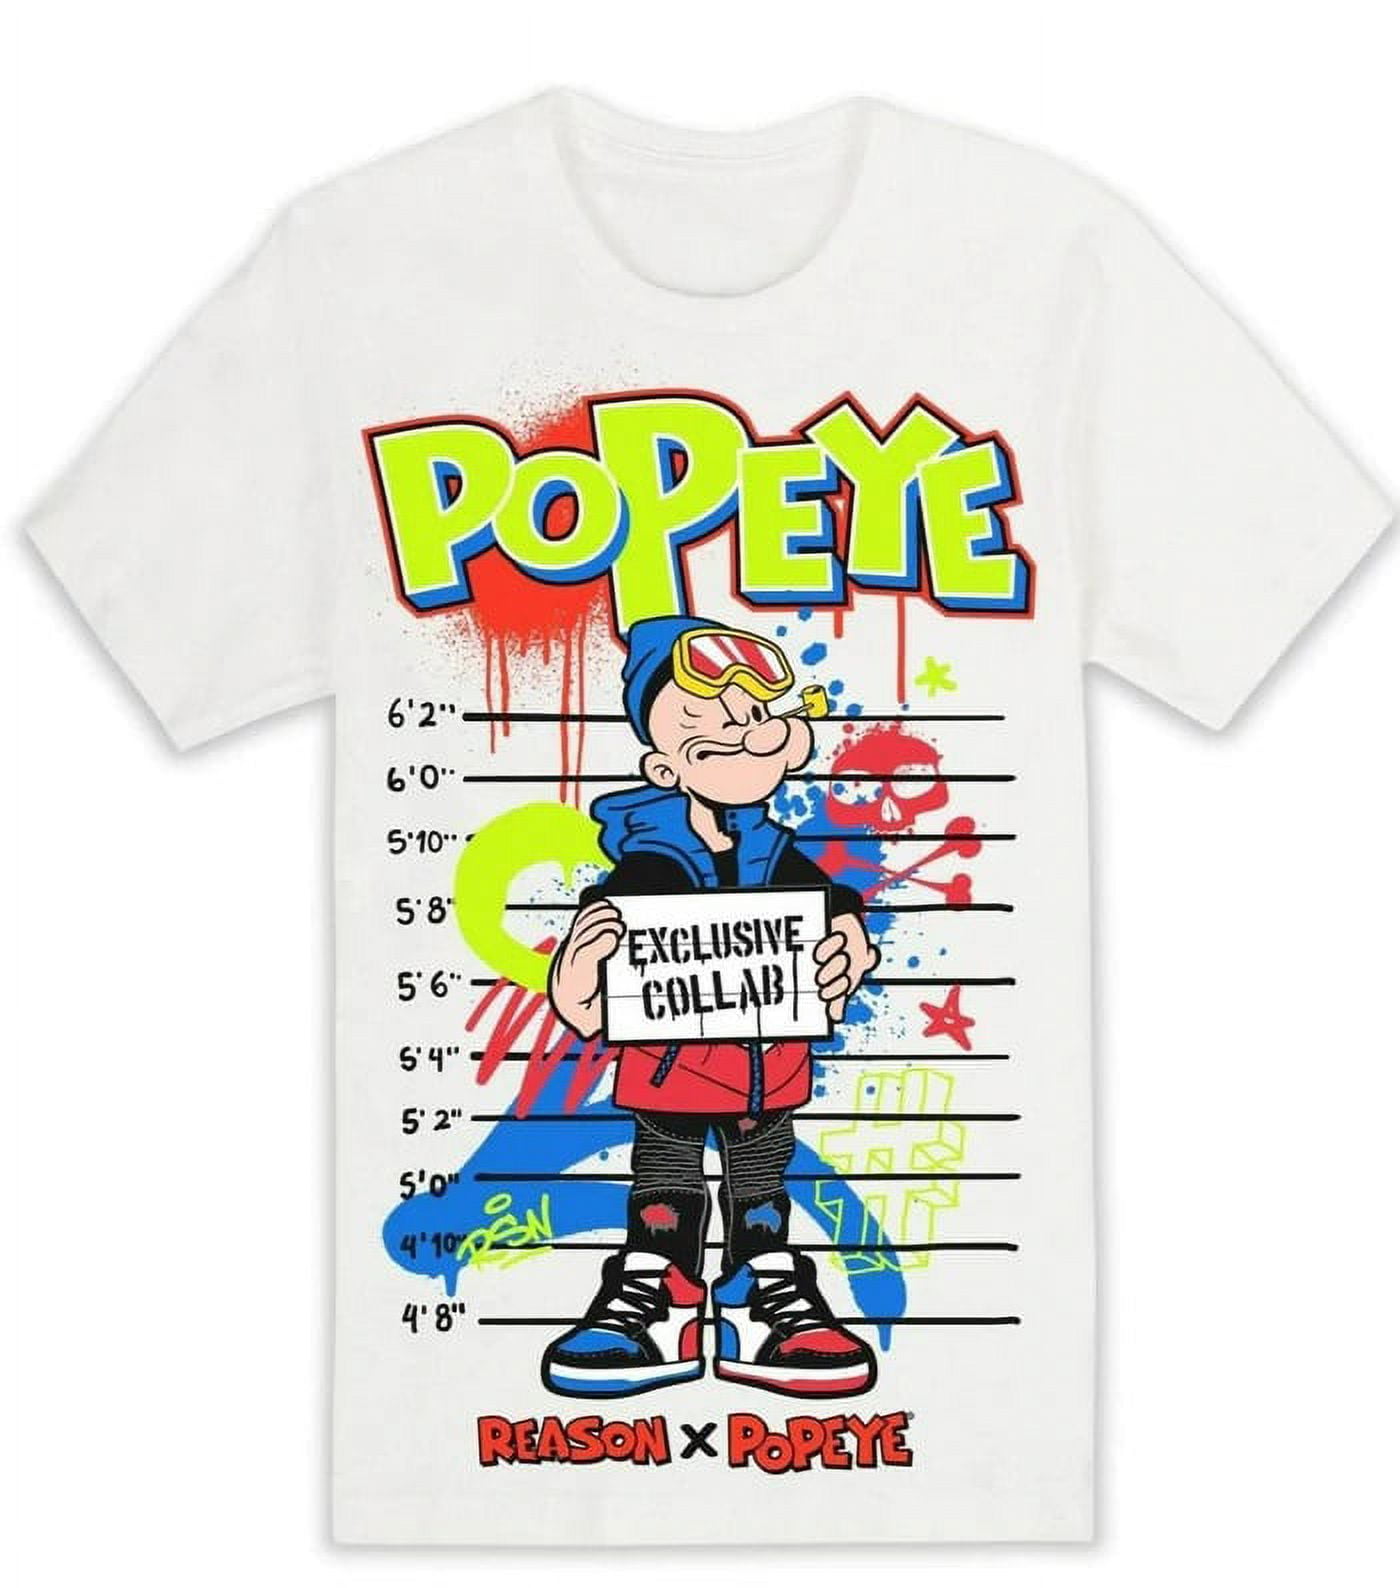 Reason Brand X Popeye Men's Officially Licensed Exclusive Graphic